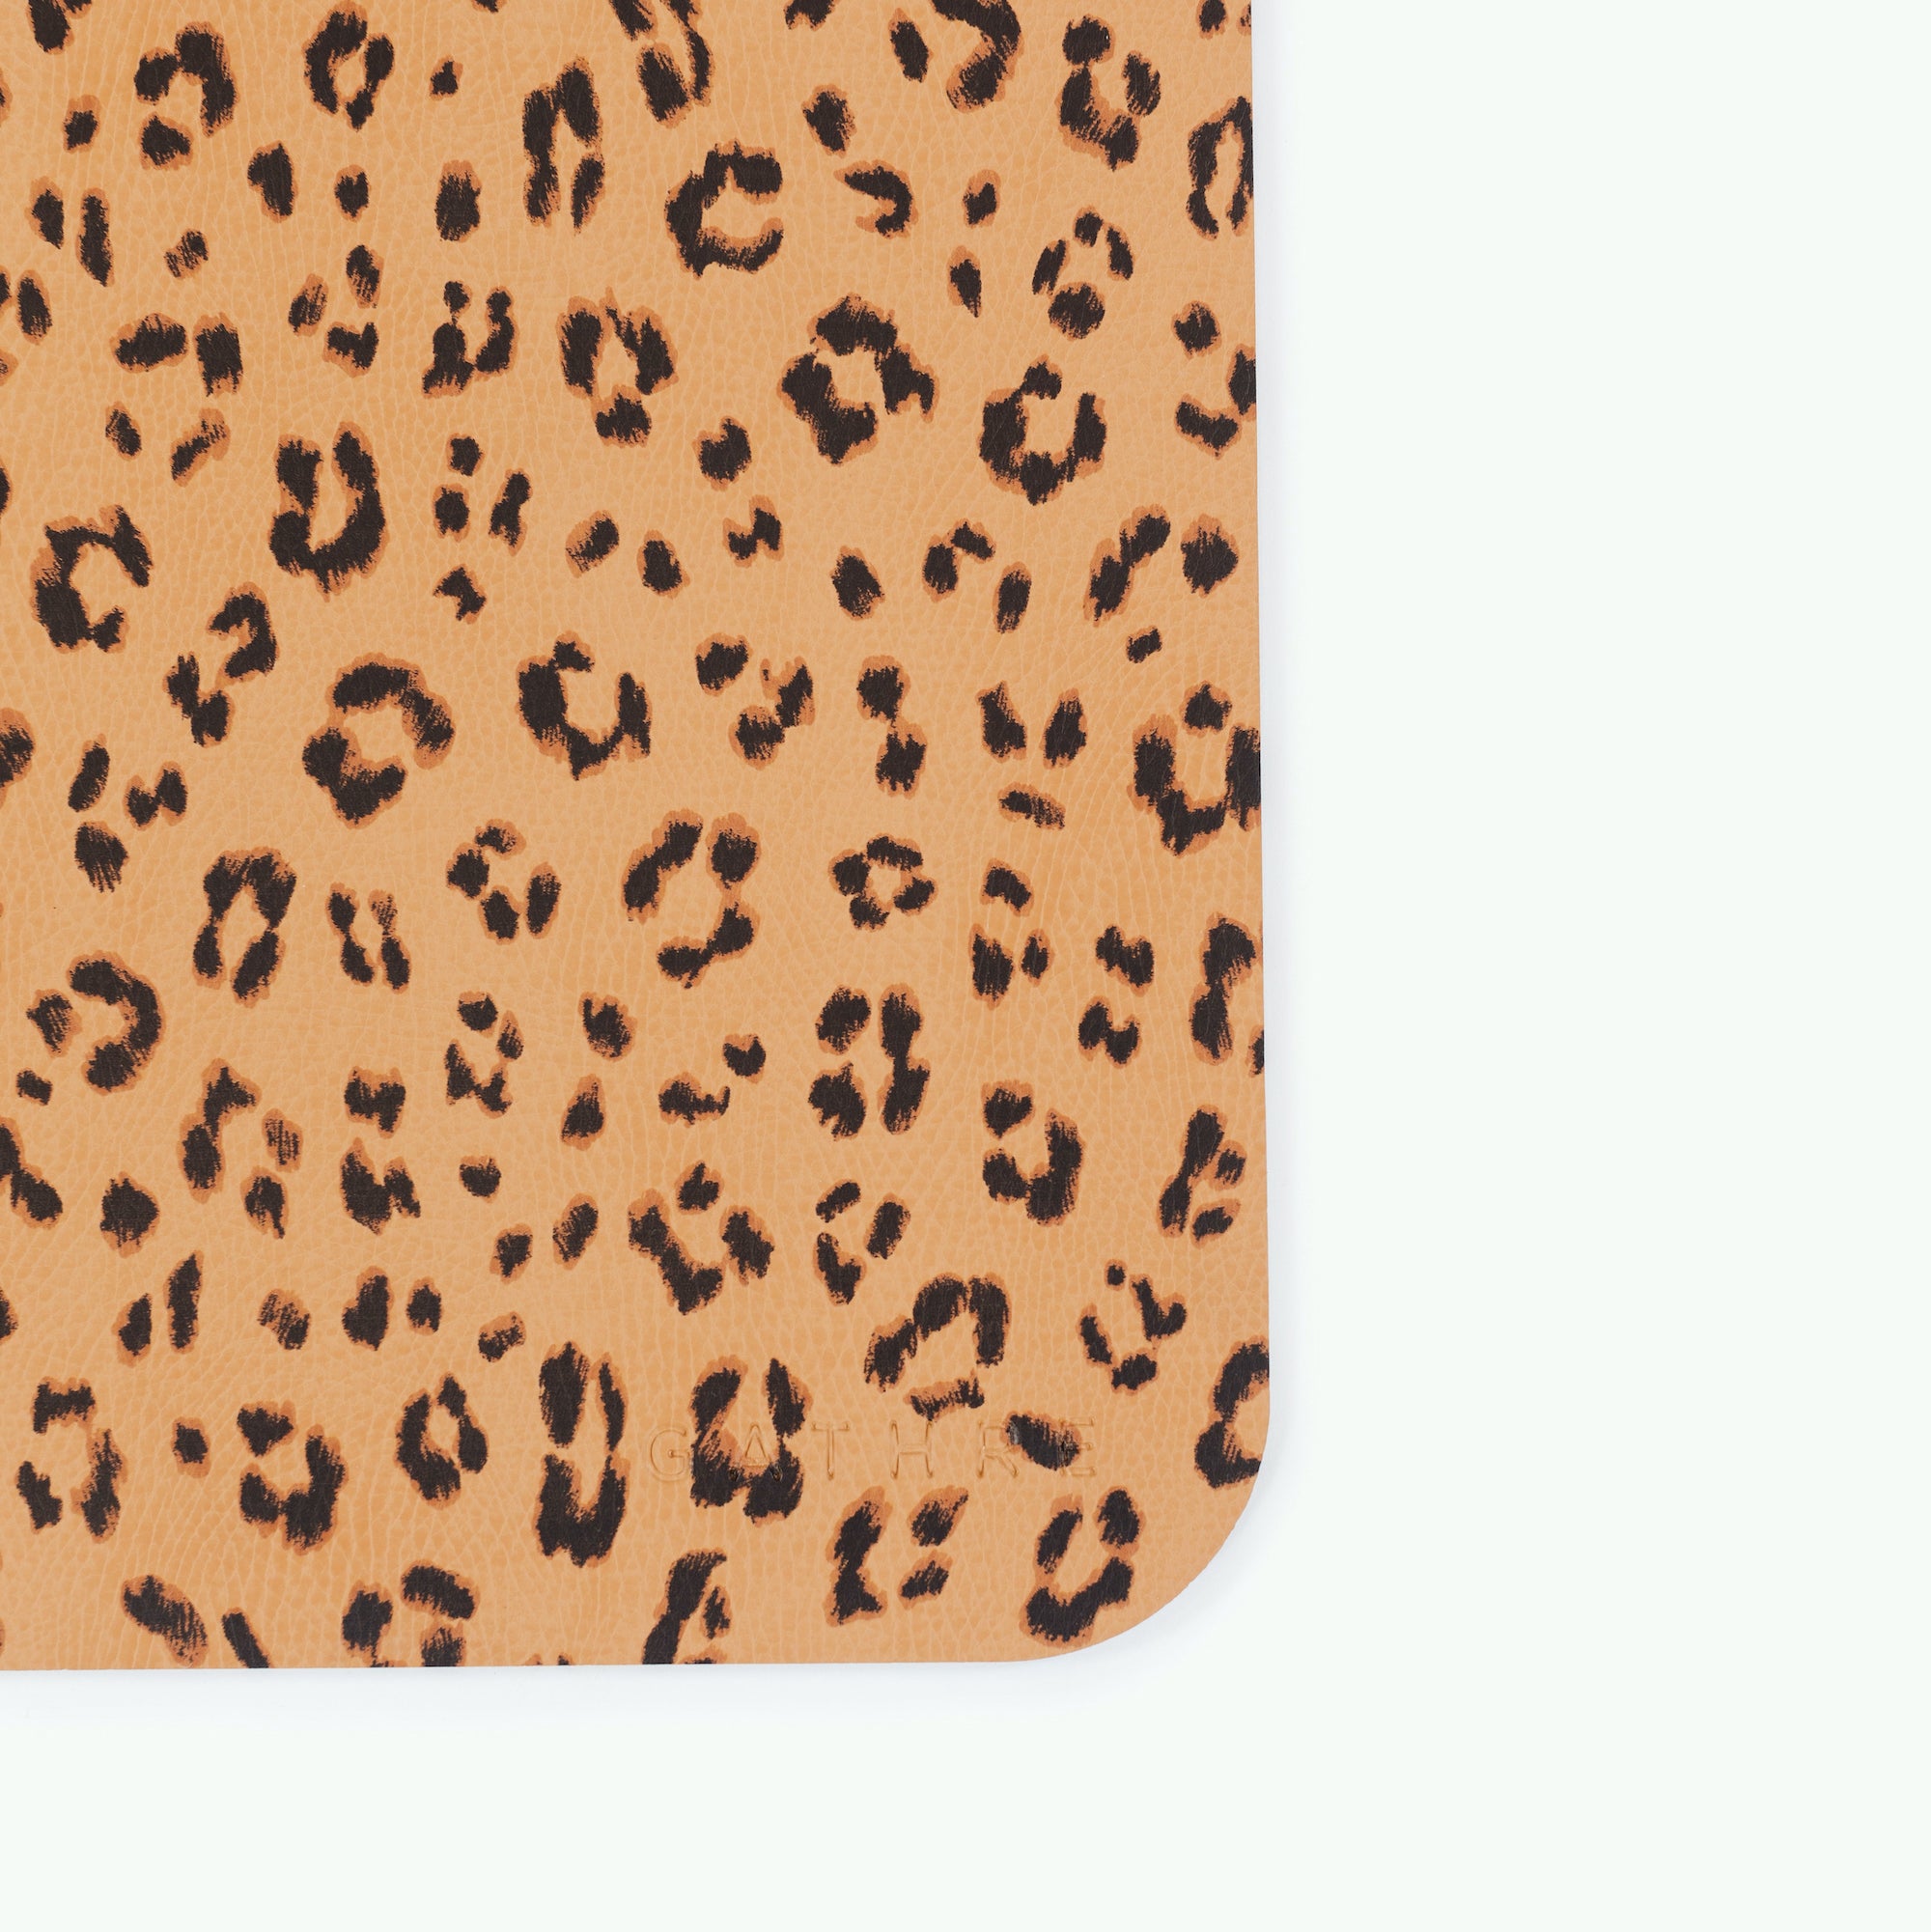 Leopard (on sale)@Gathre deboss on the Small Leopard Home Mat